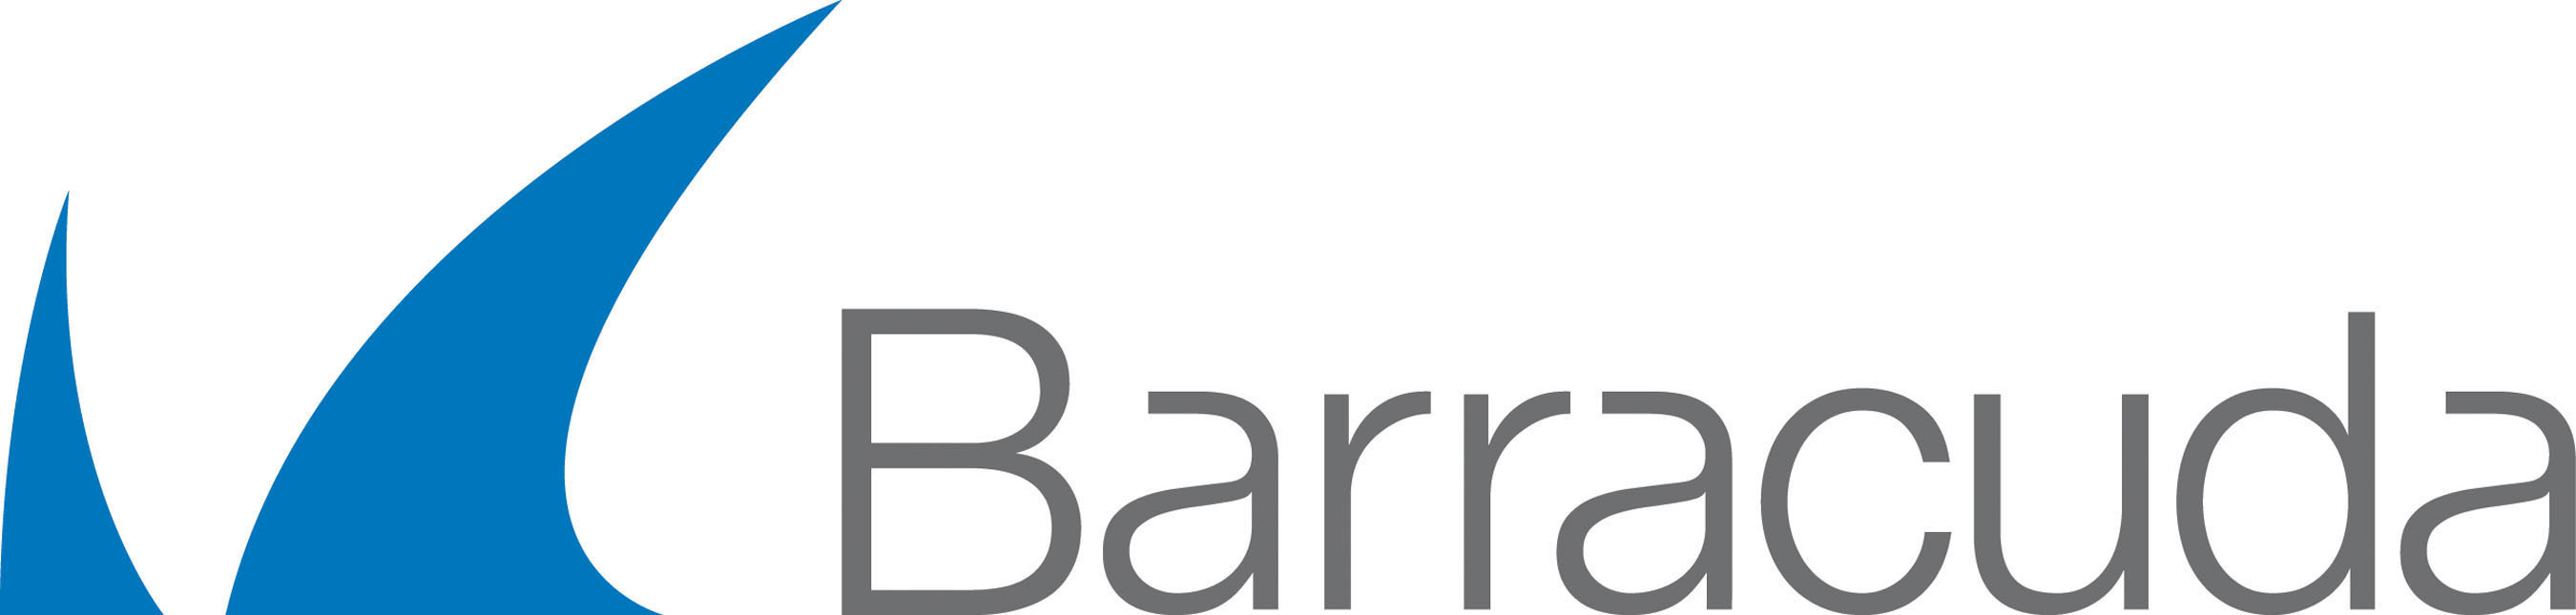 Barracuda Essentials Compliance Edition - Subscription License - 1 User - 1 Month